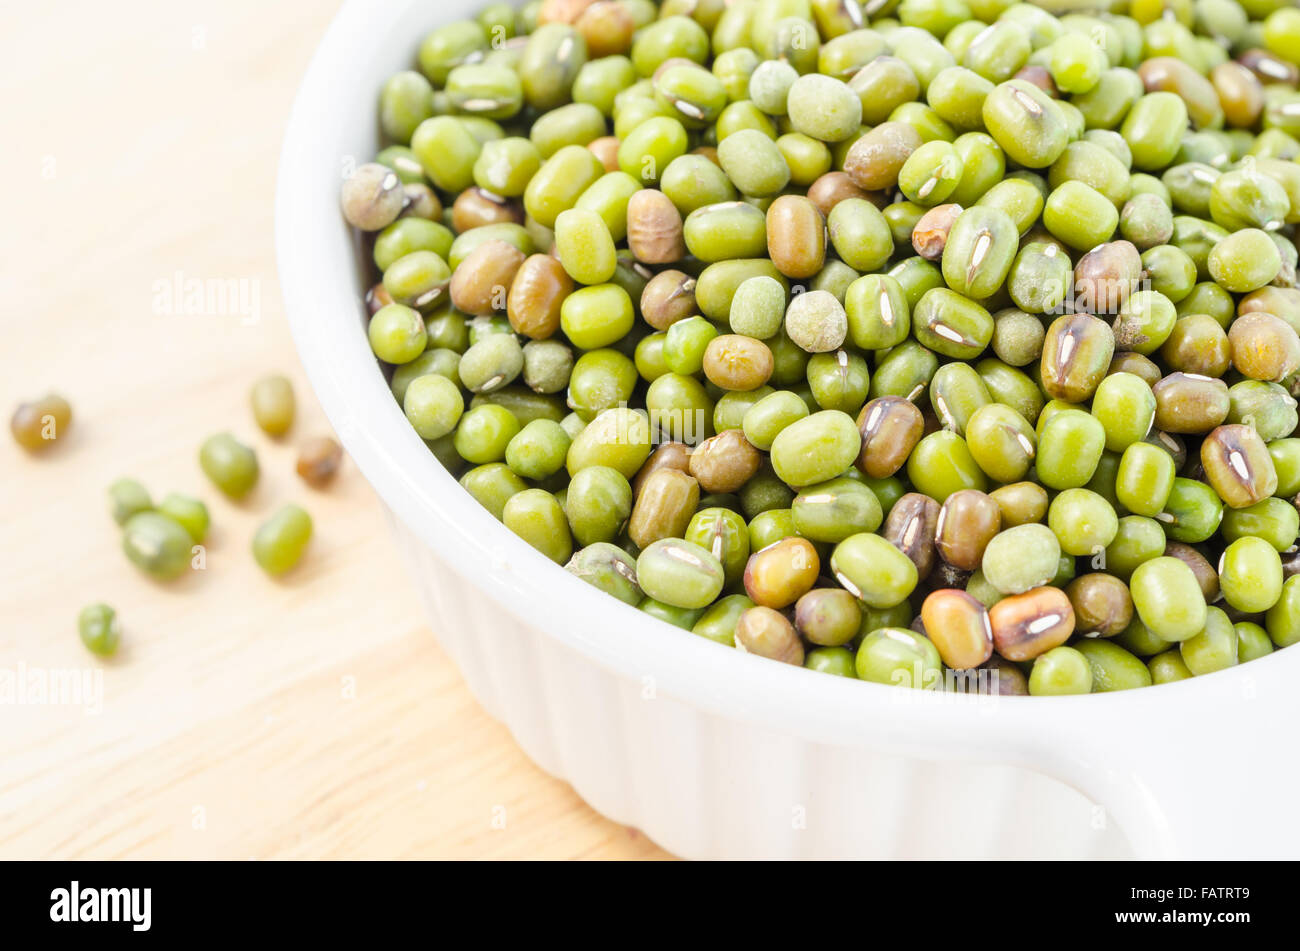 Healthy vegetarian super foods ingredient mung beans in cup on wooden background. Stock Photo